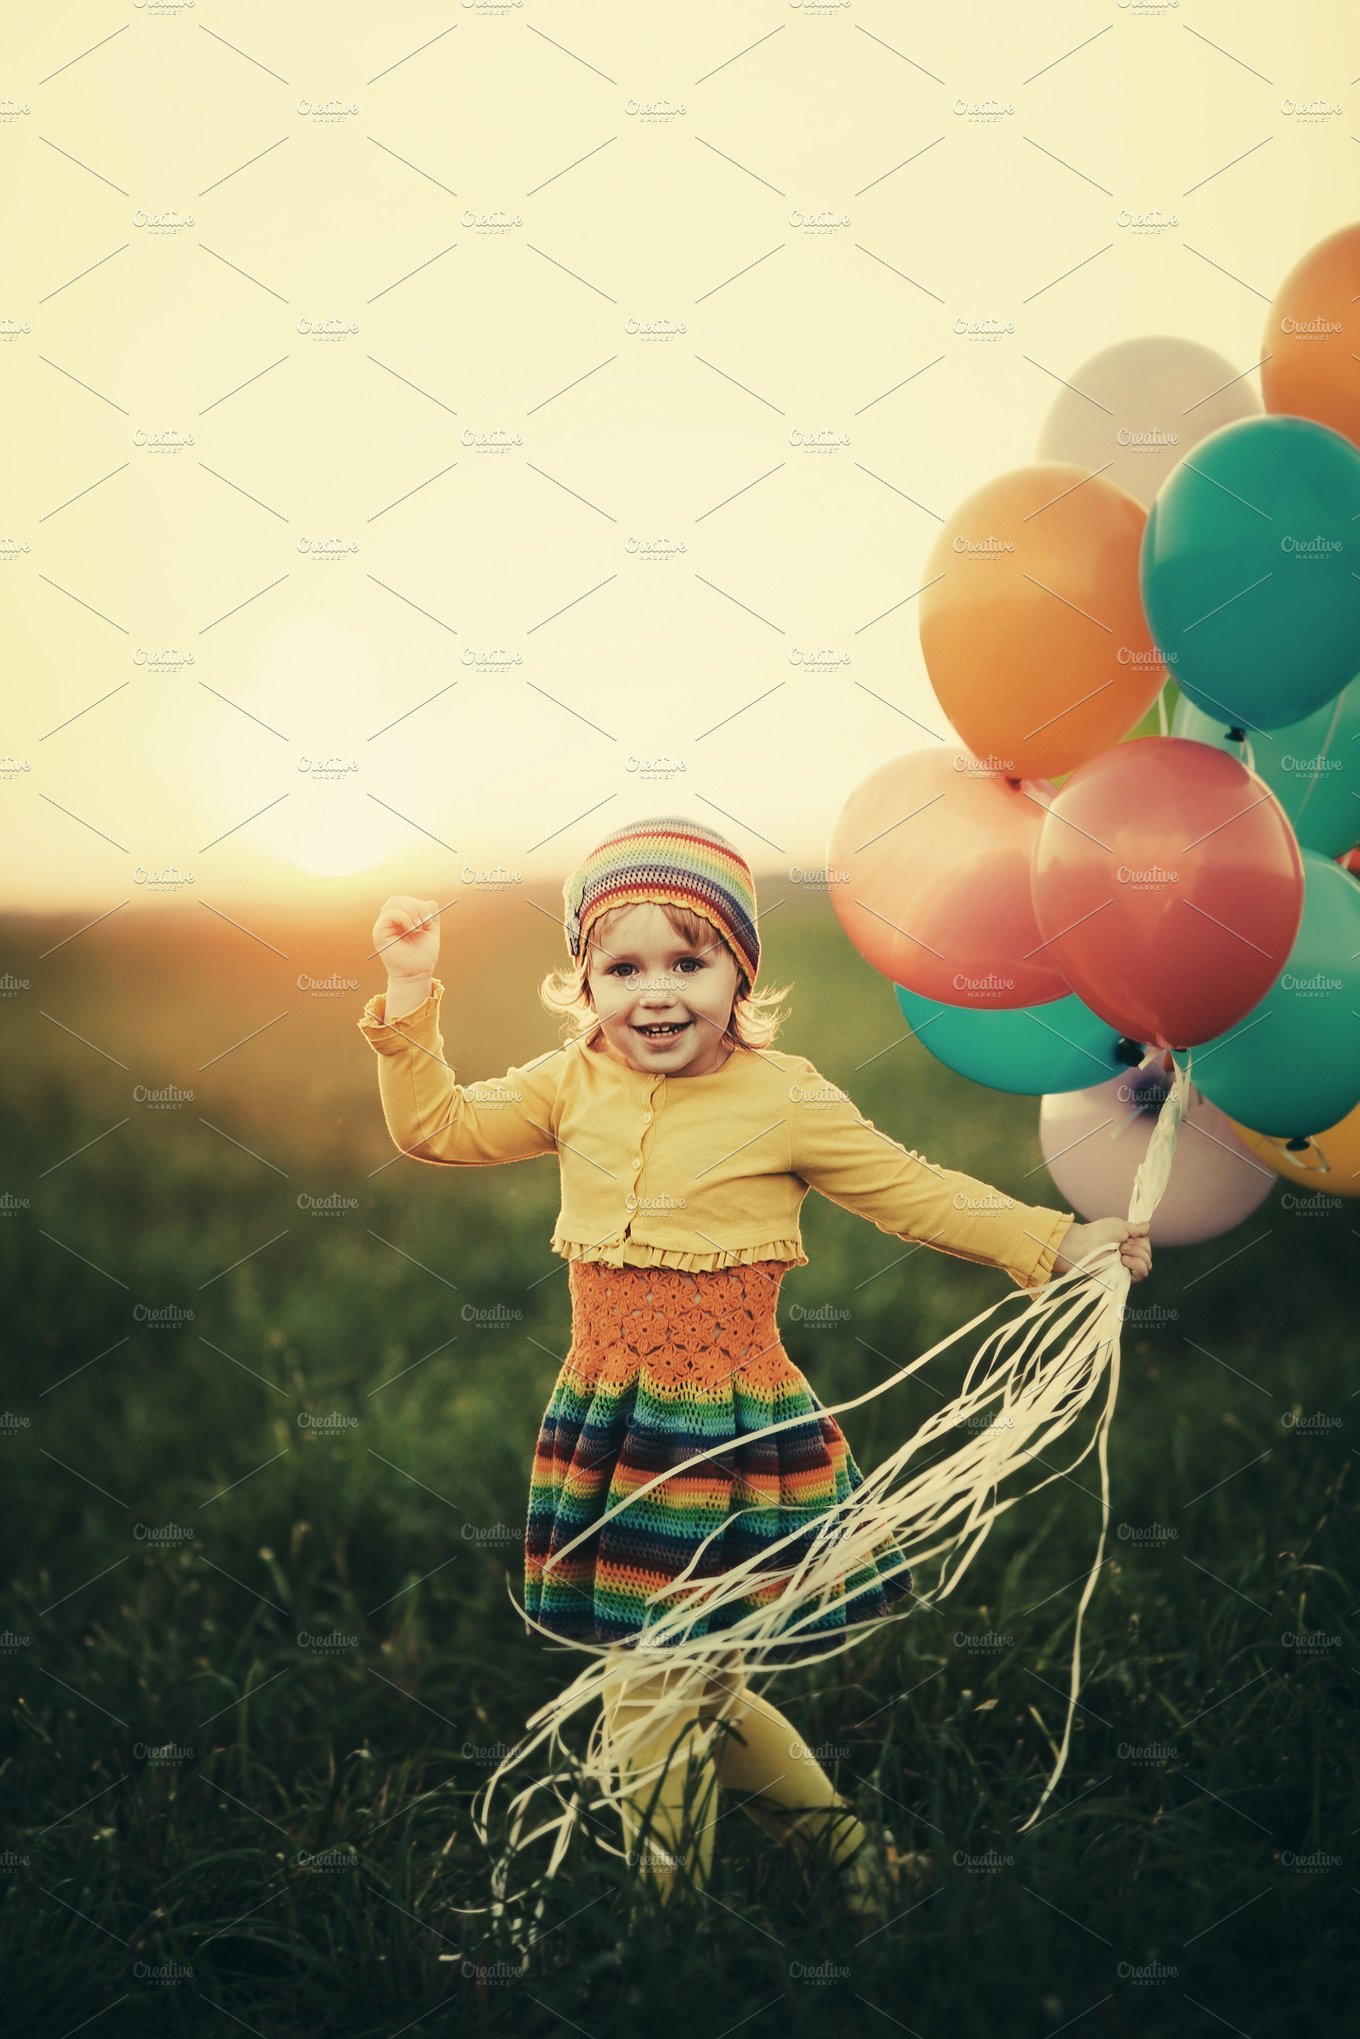 happy girl with balloons ~ People Photos ~ Creative Market